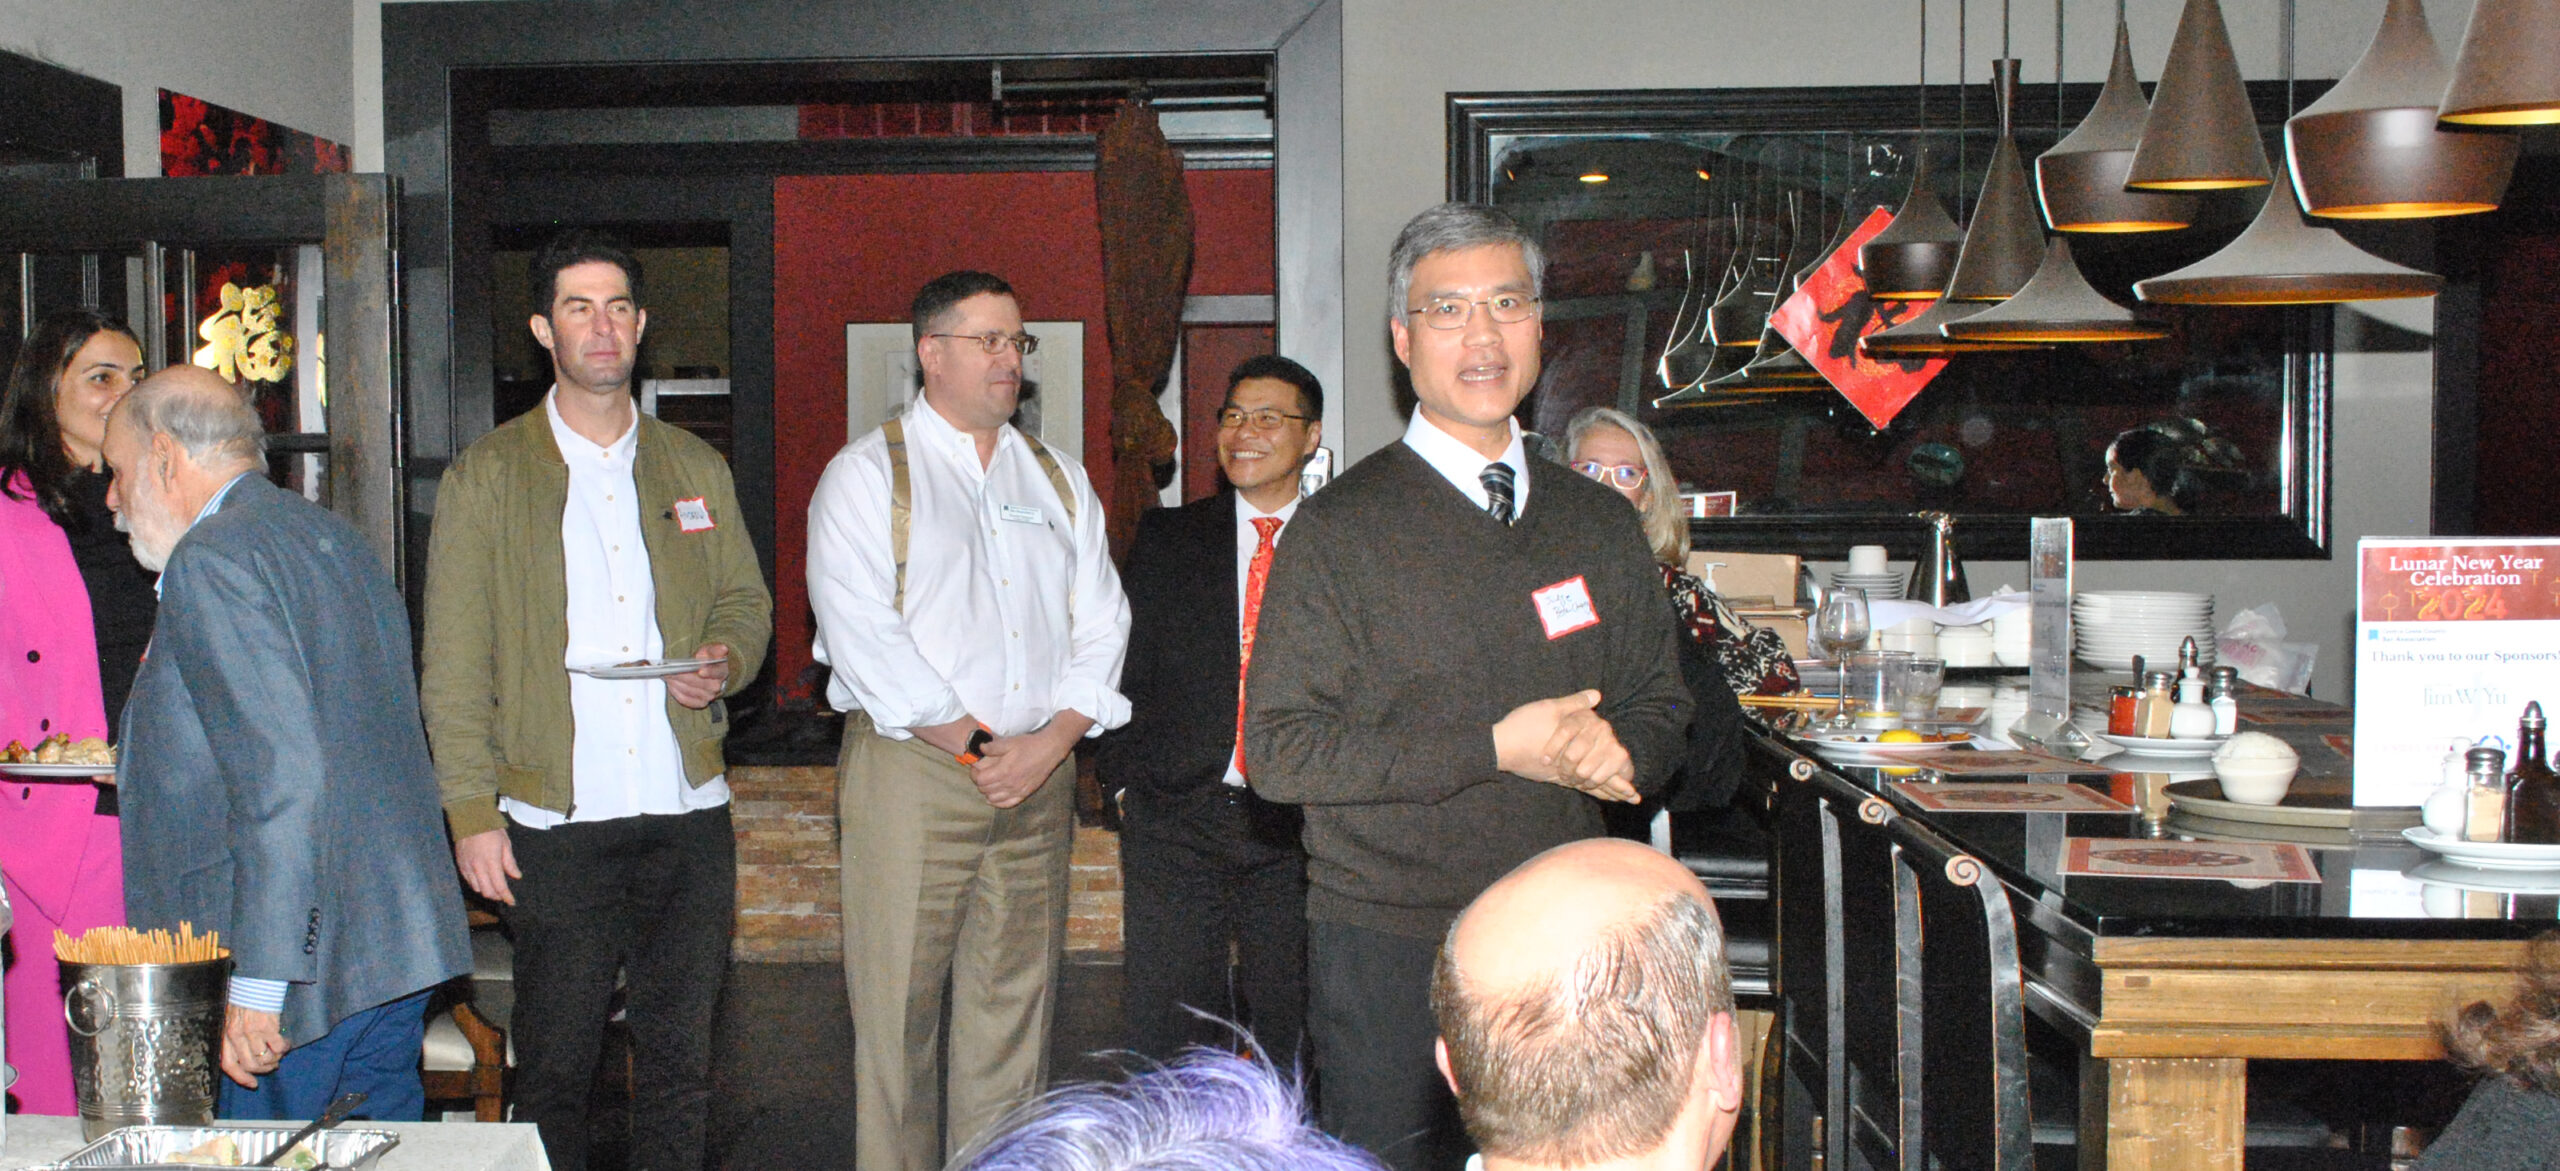 Judge Peter Change welcomed members of the CCCBA to the Lunar New Year celebration at Peony Garden Restaurant in Walnut Creek on February 22, 2024.